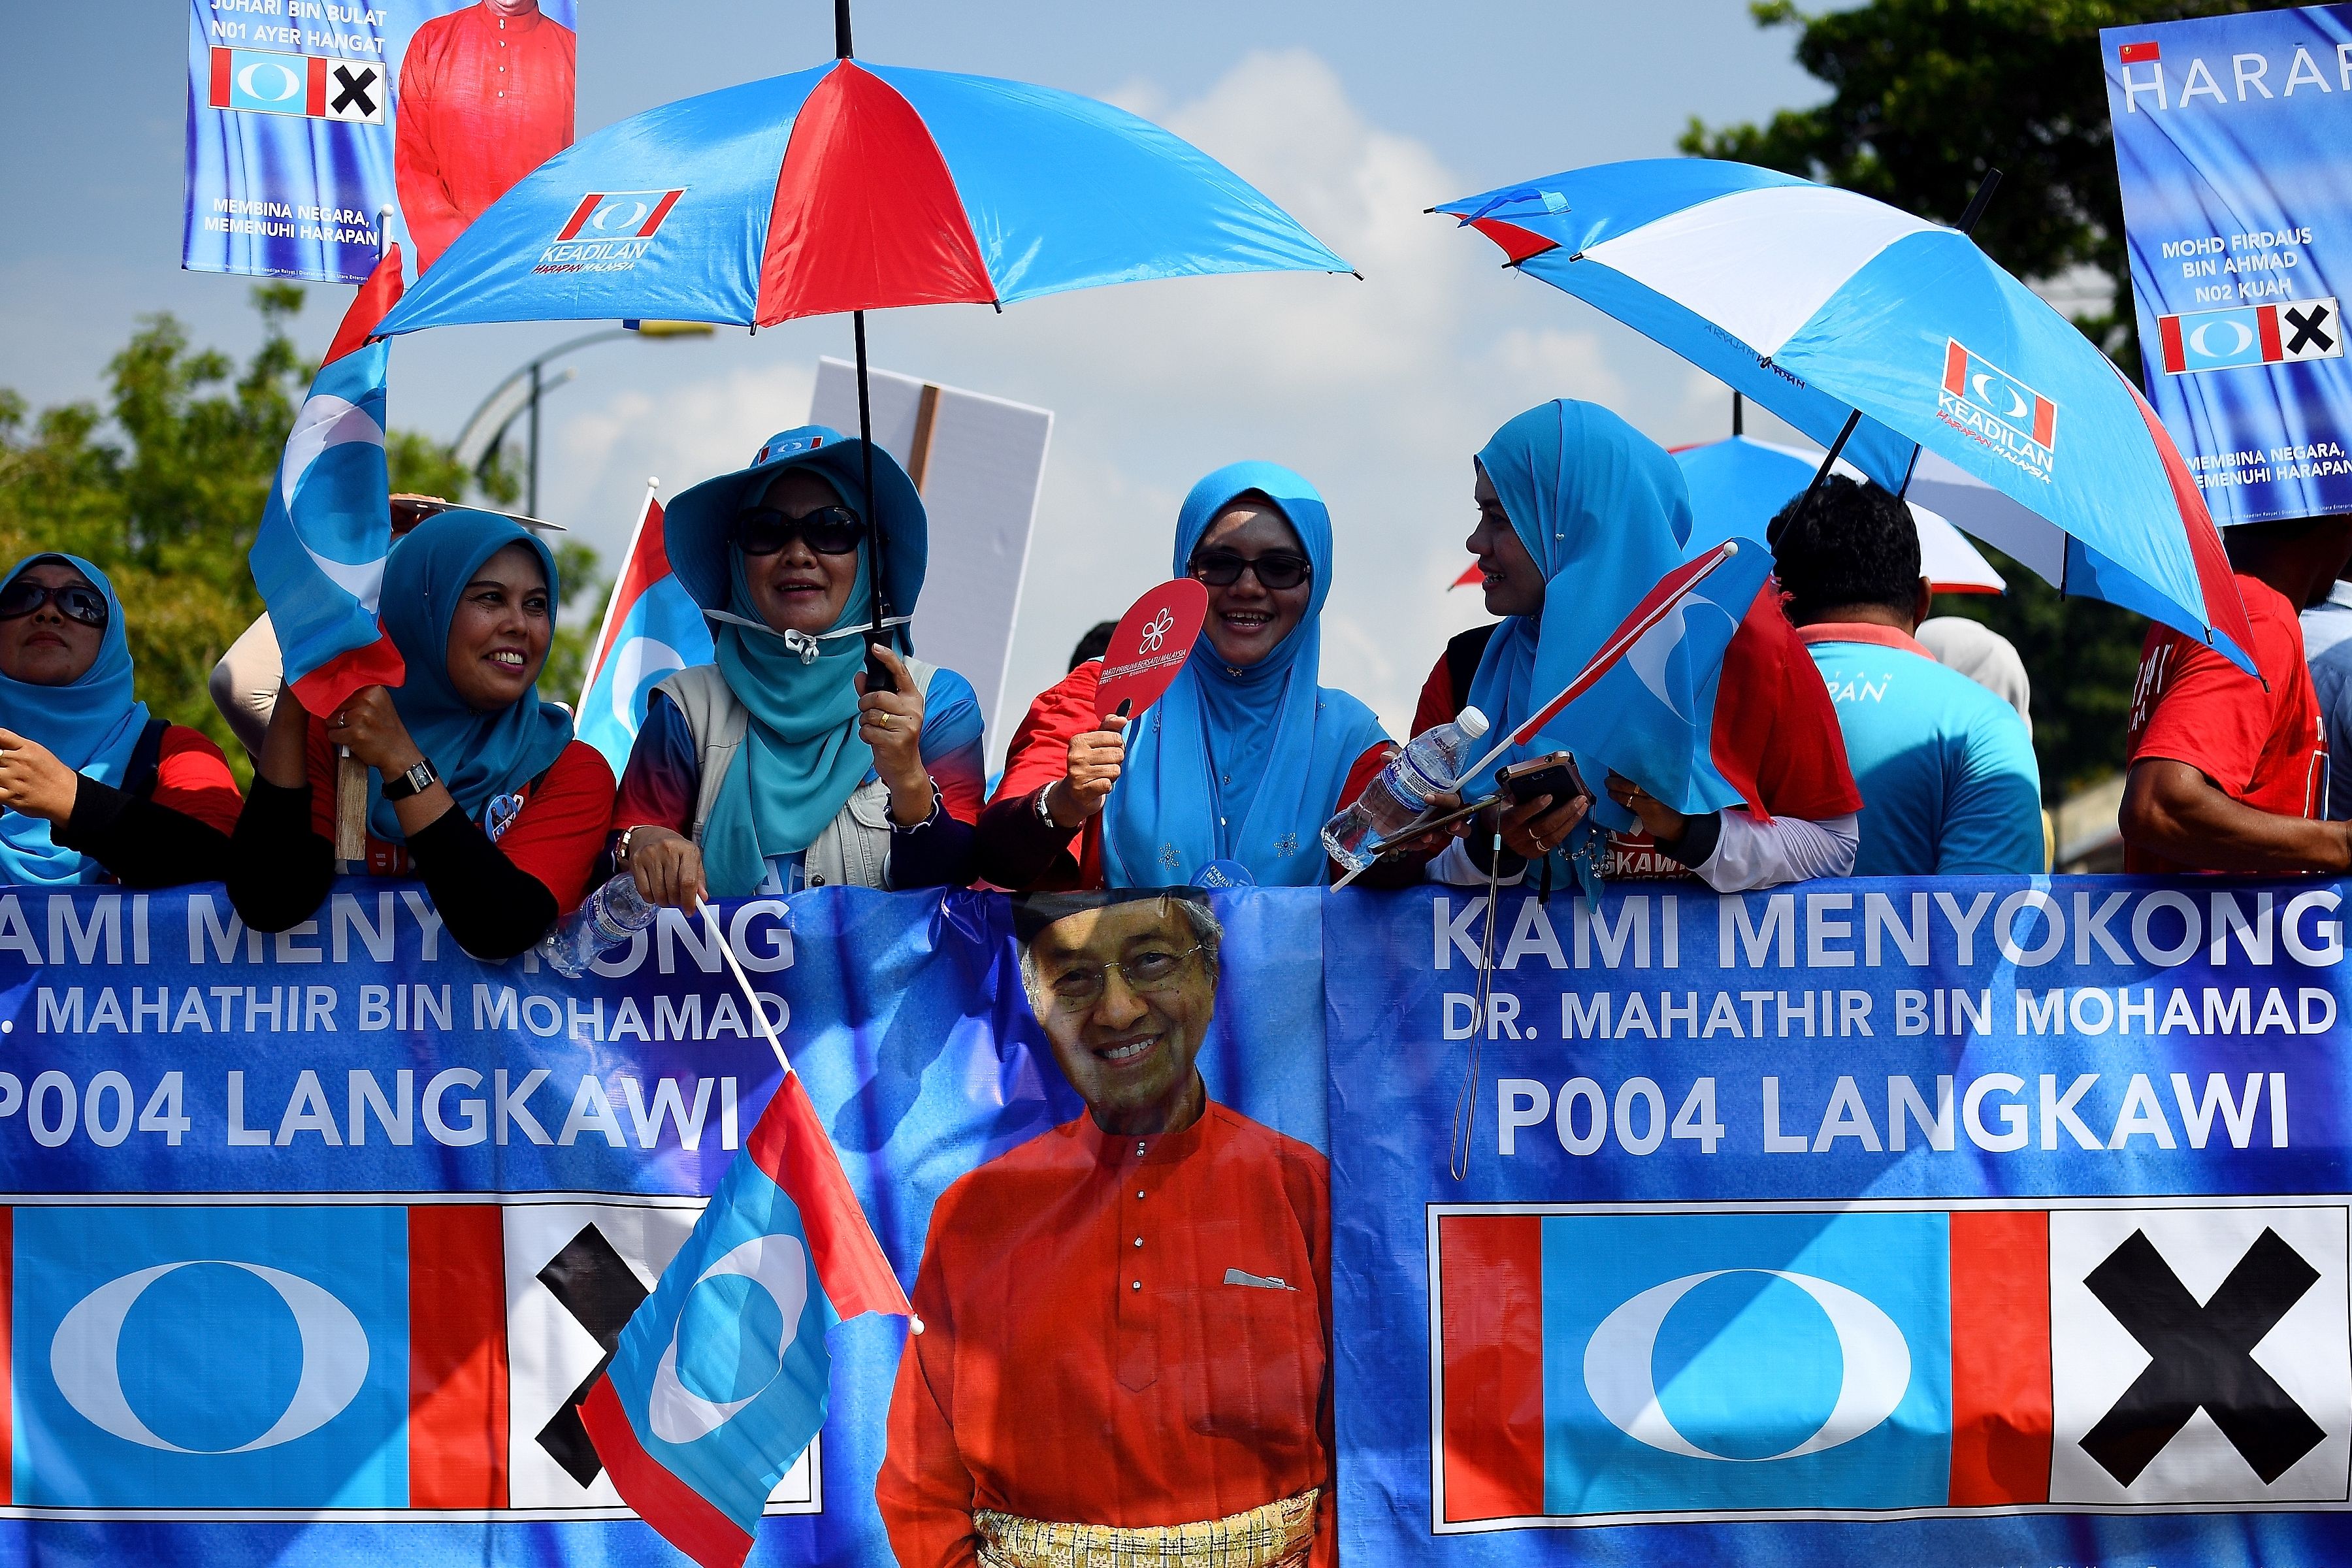 Supporters of former Malaysian prime minister and opposition party Pakatan Harapan's prime ministerial candidate Mahathir Mohamad in Langkawi on April 28, 2018. (Manan Vatstatana—AFP/Getty Images)